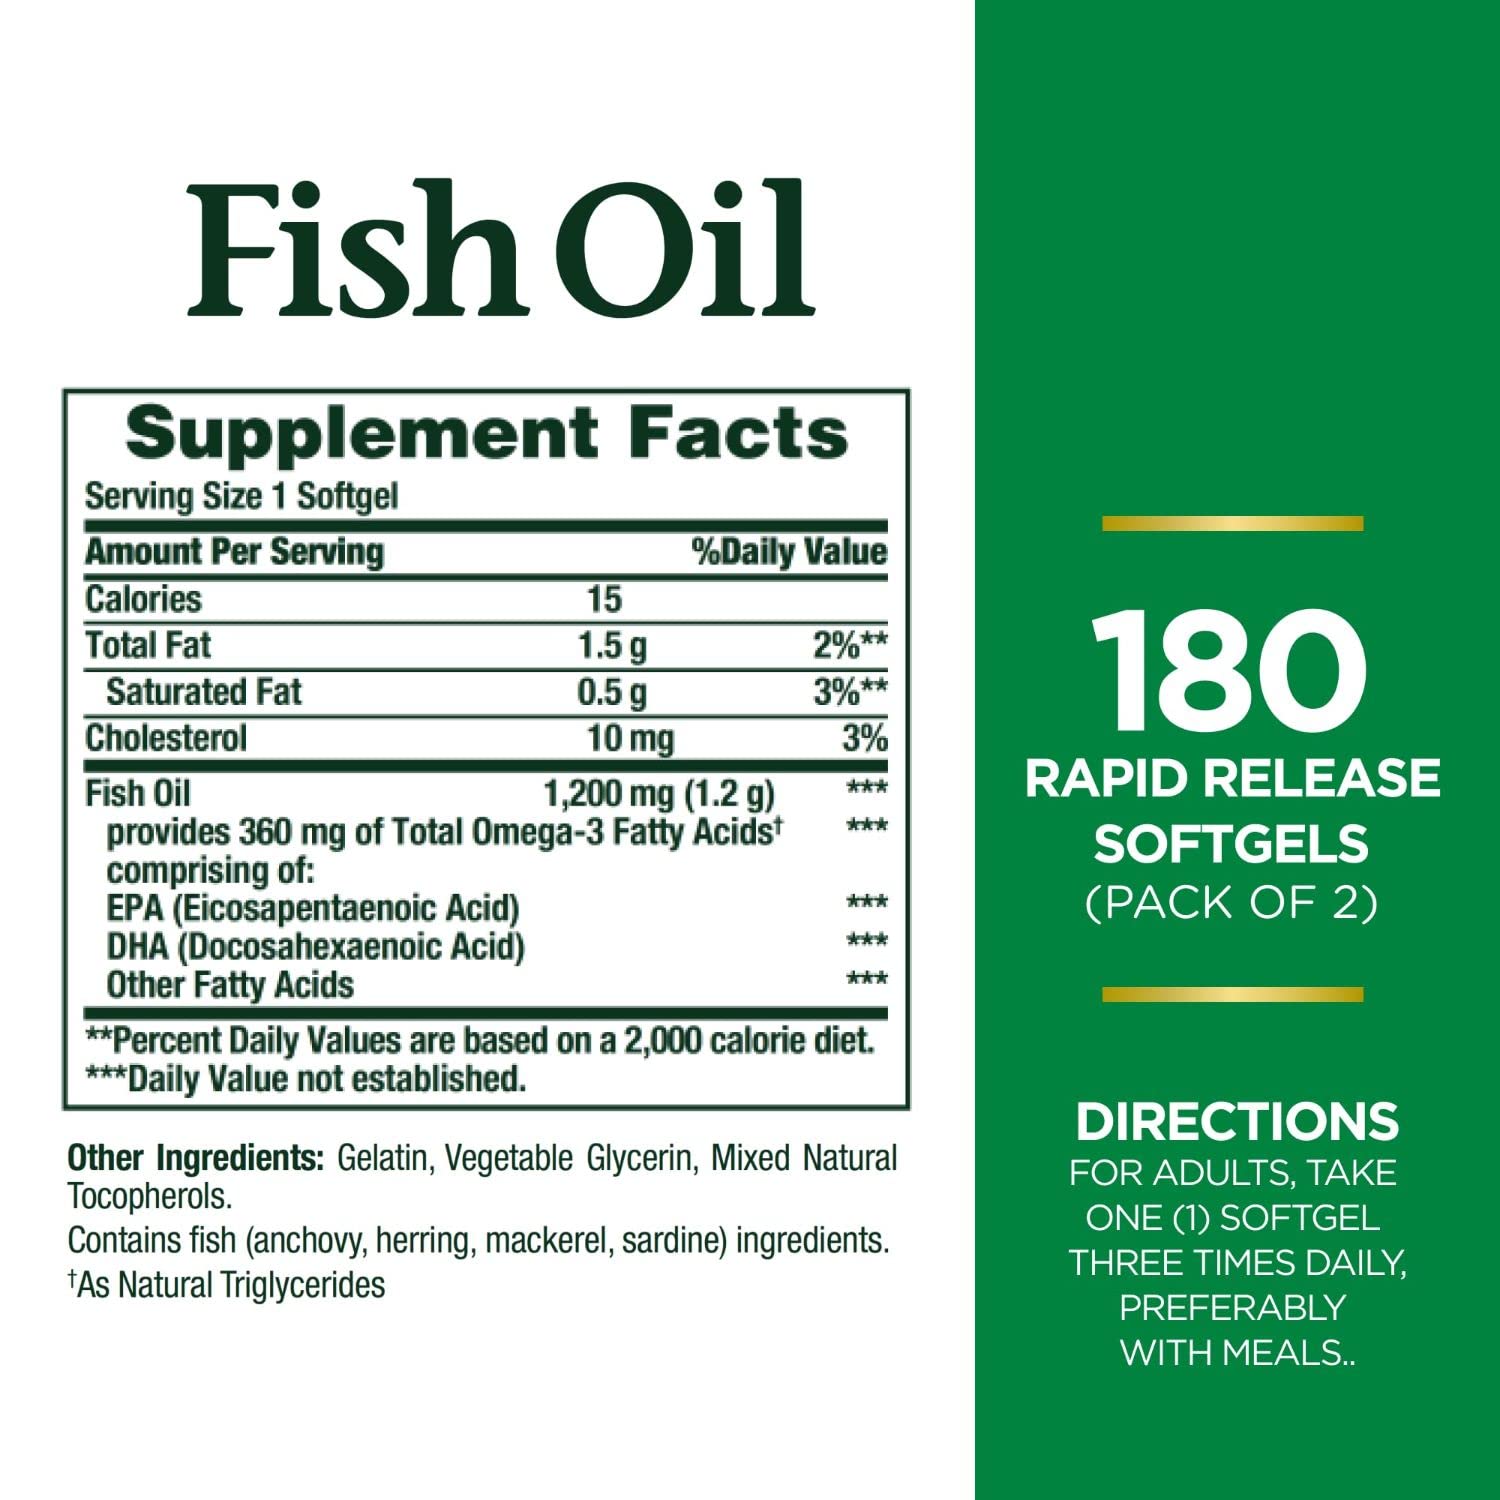 Nature’s Bounty Fish Oil 1200 mg, Twin Pack, Supports Heart Health With Omega 3 EPA & DHA, 360 Rapid Release Softgels